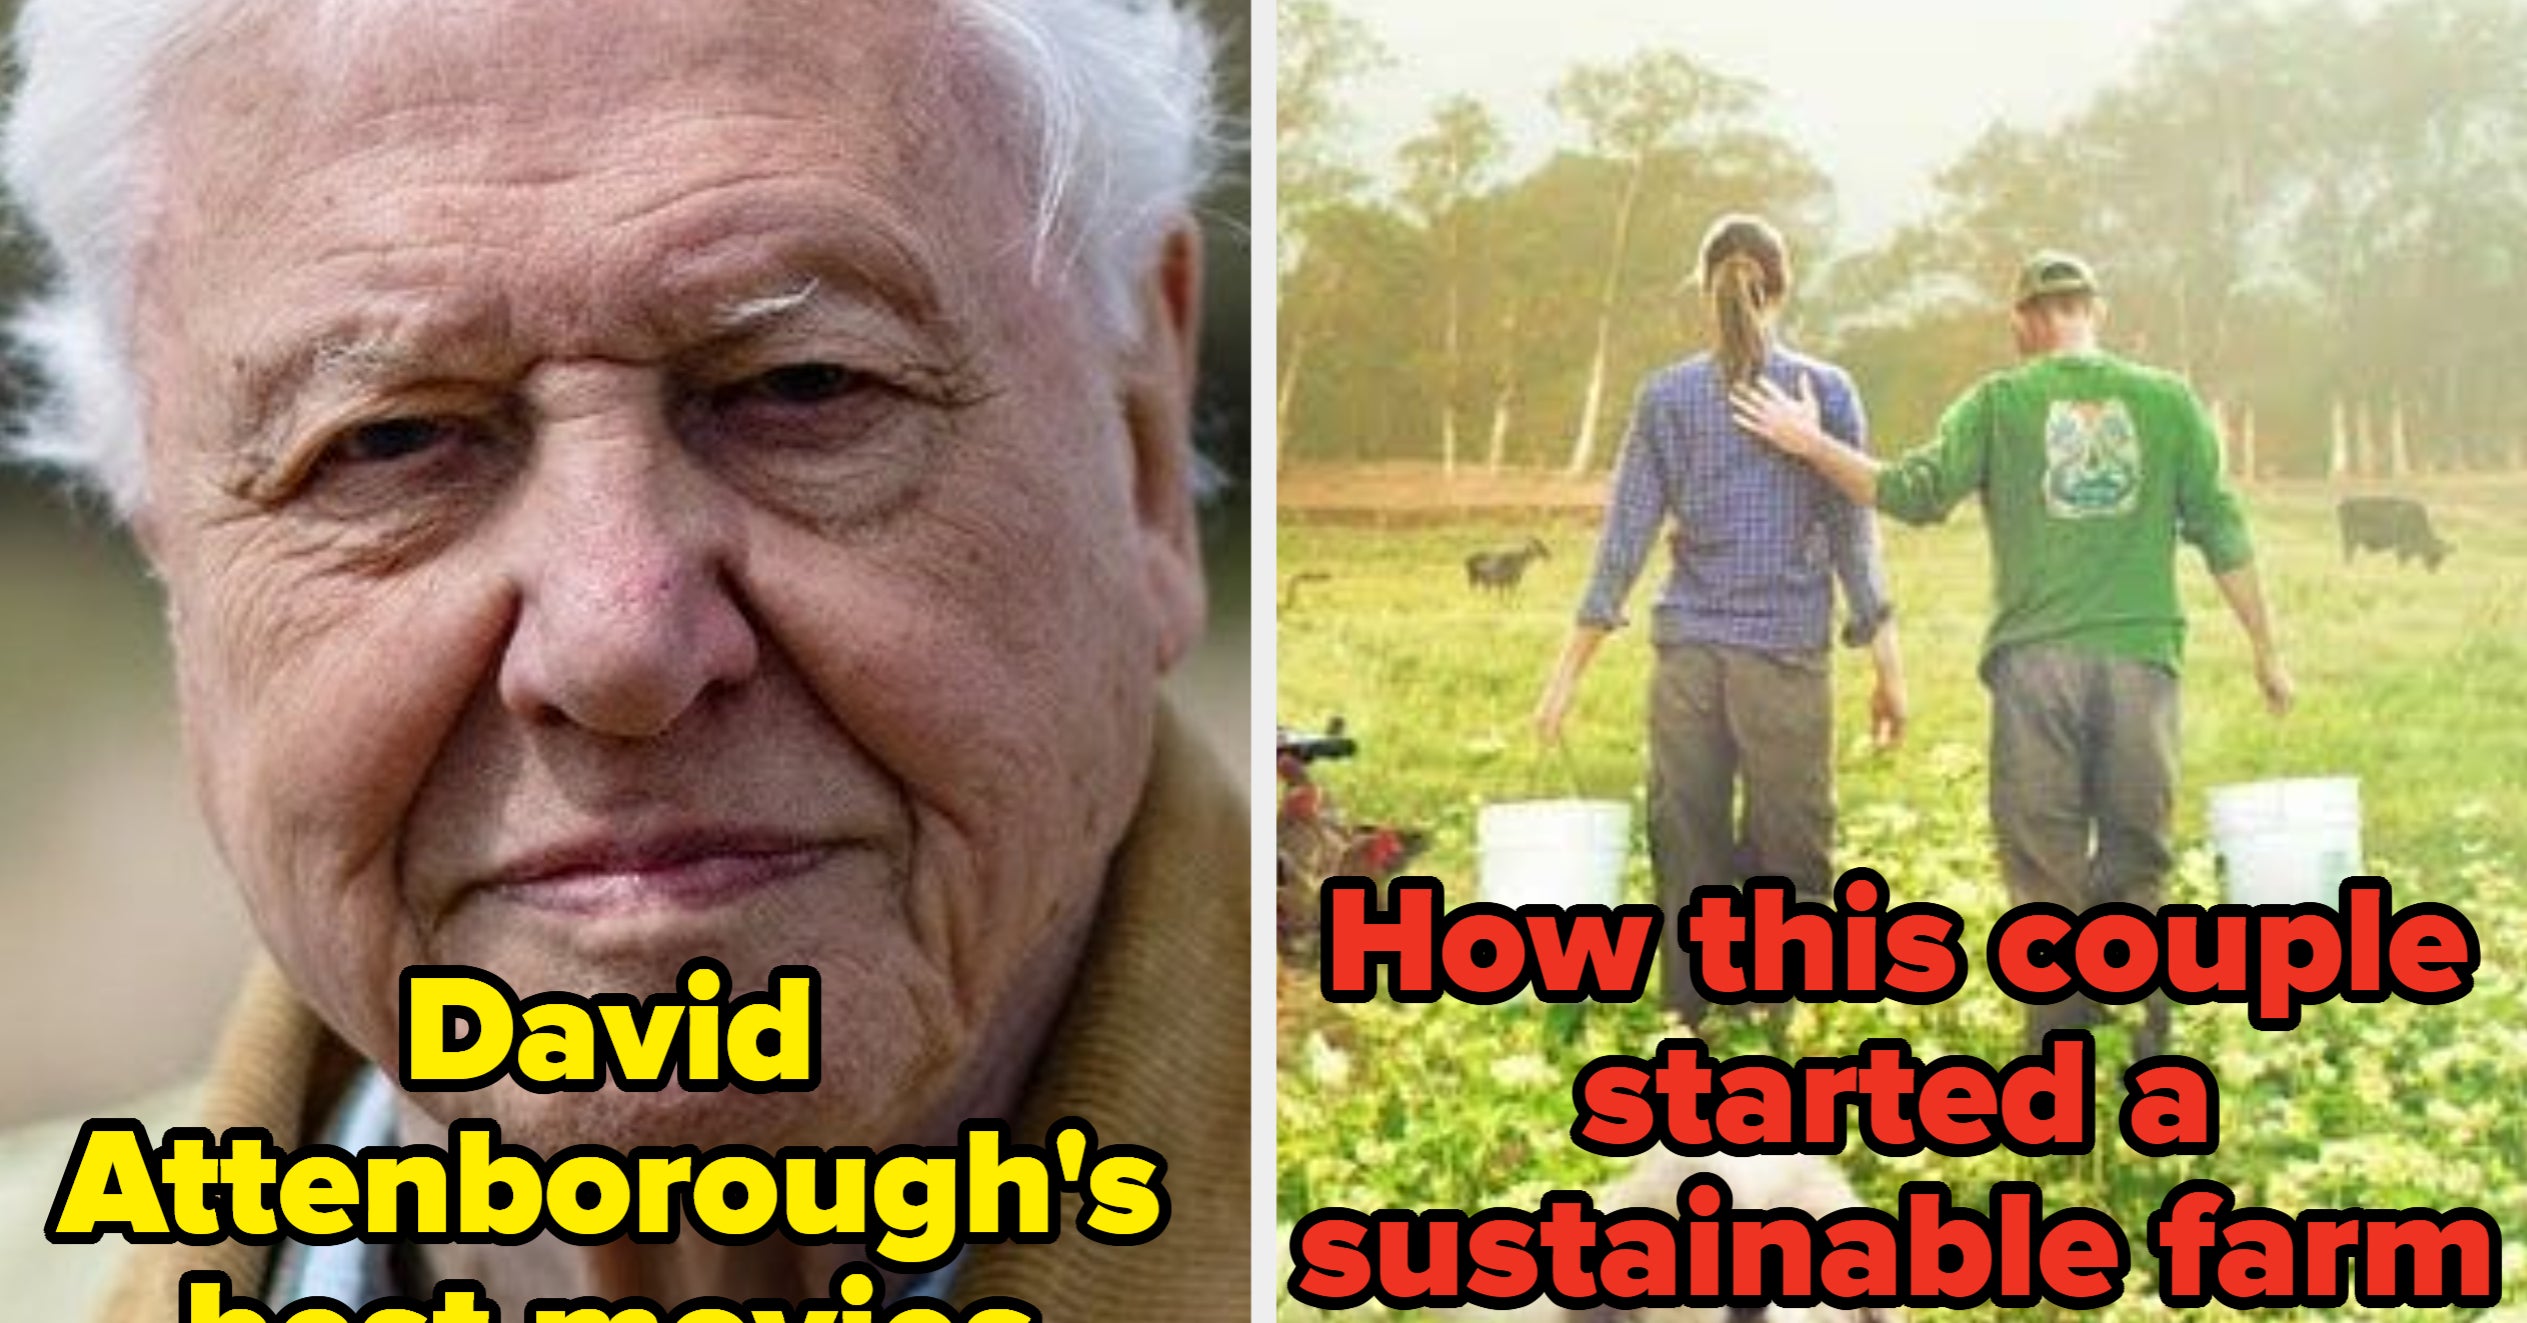 23 Documentaries You Can Watch About Saving The Planet